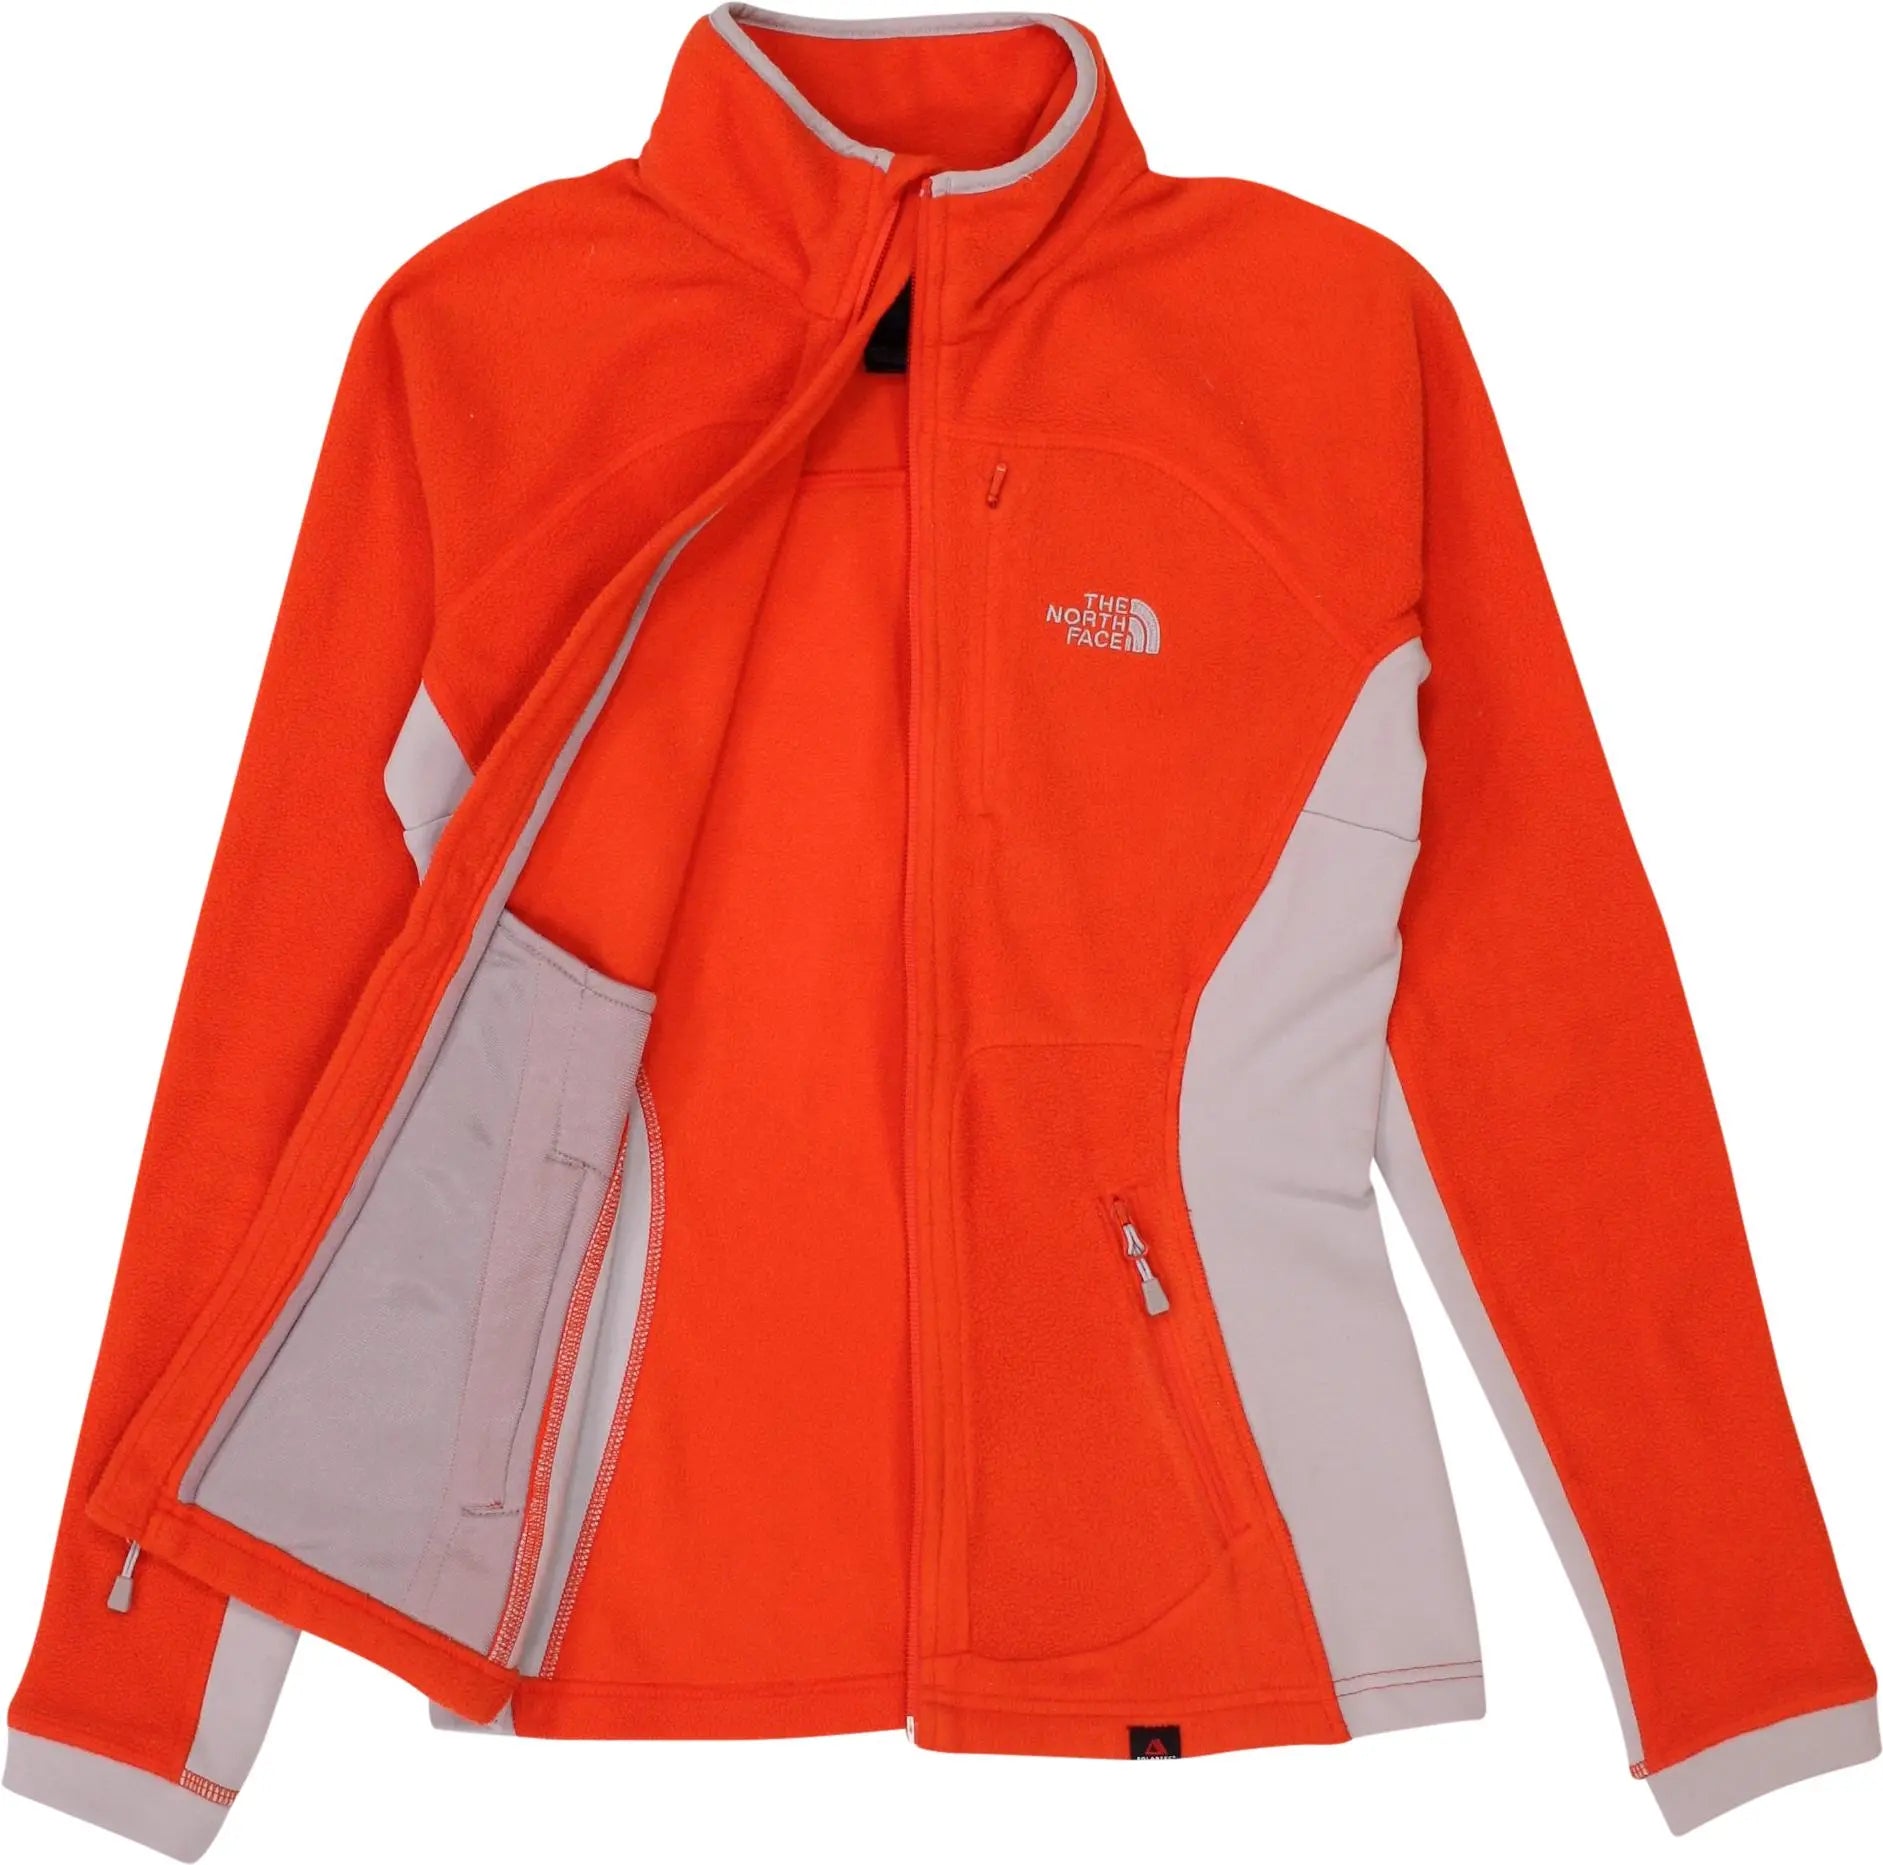 The North Face - Orange Fleecejack by The North Face- ThriftTale.com - Vintage and second handclothing